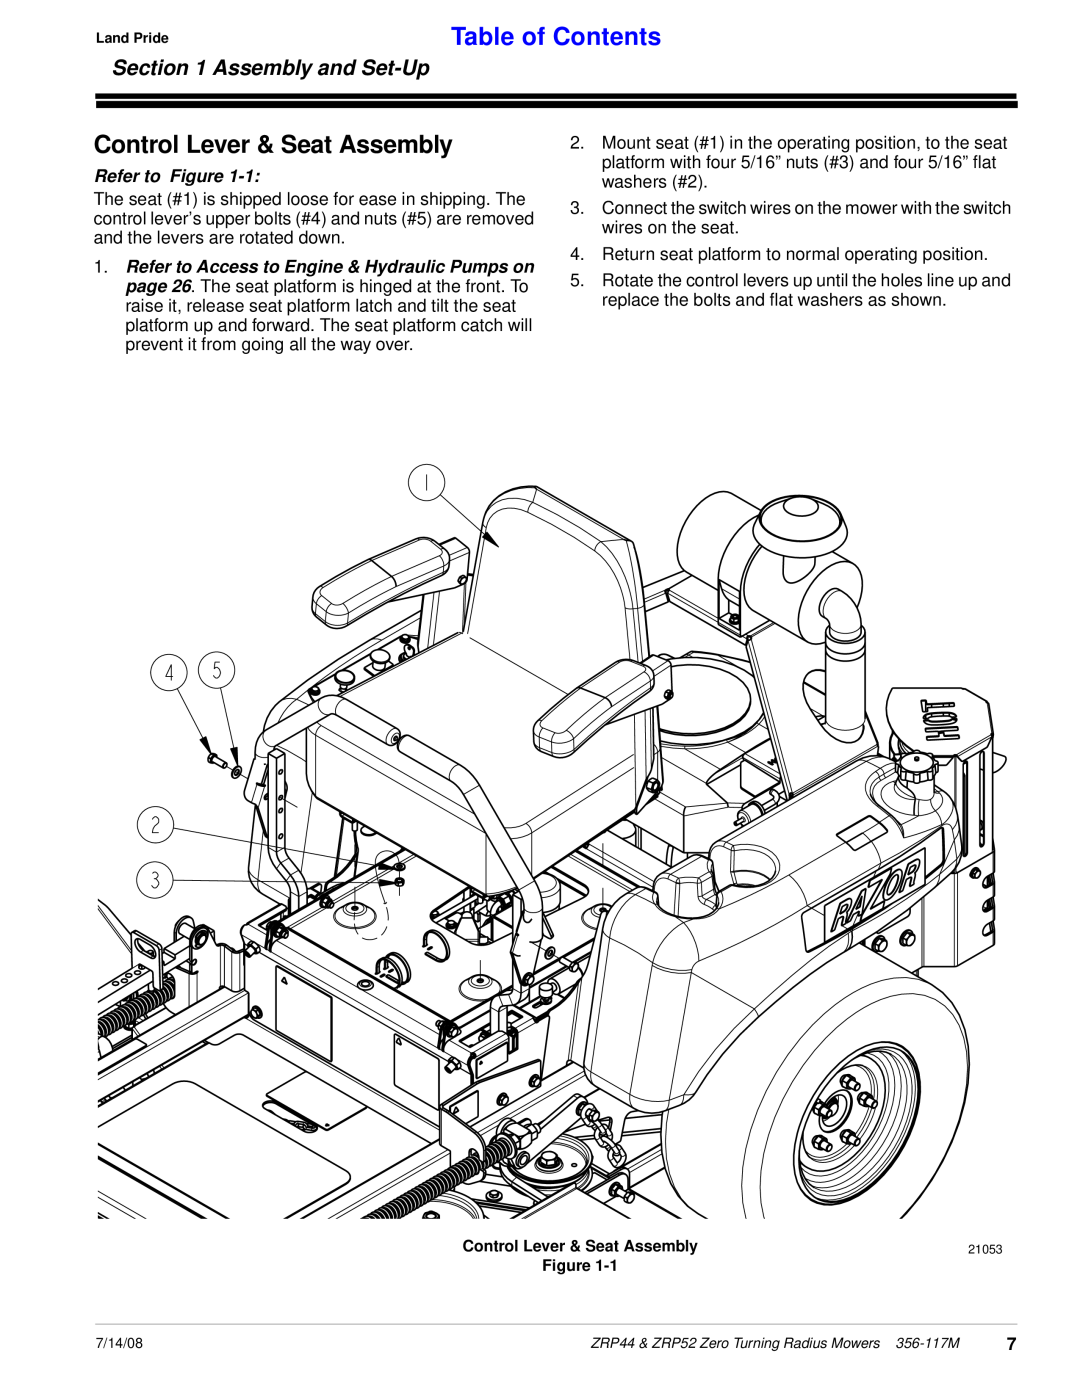 Land Pride ZRP44, ZRP52 manual Control Lever & Seat Assembly, Table of Contents, Assembly and Set-Up, Refer to Figure 